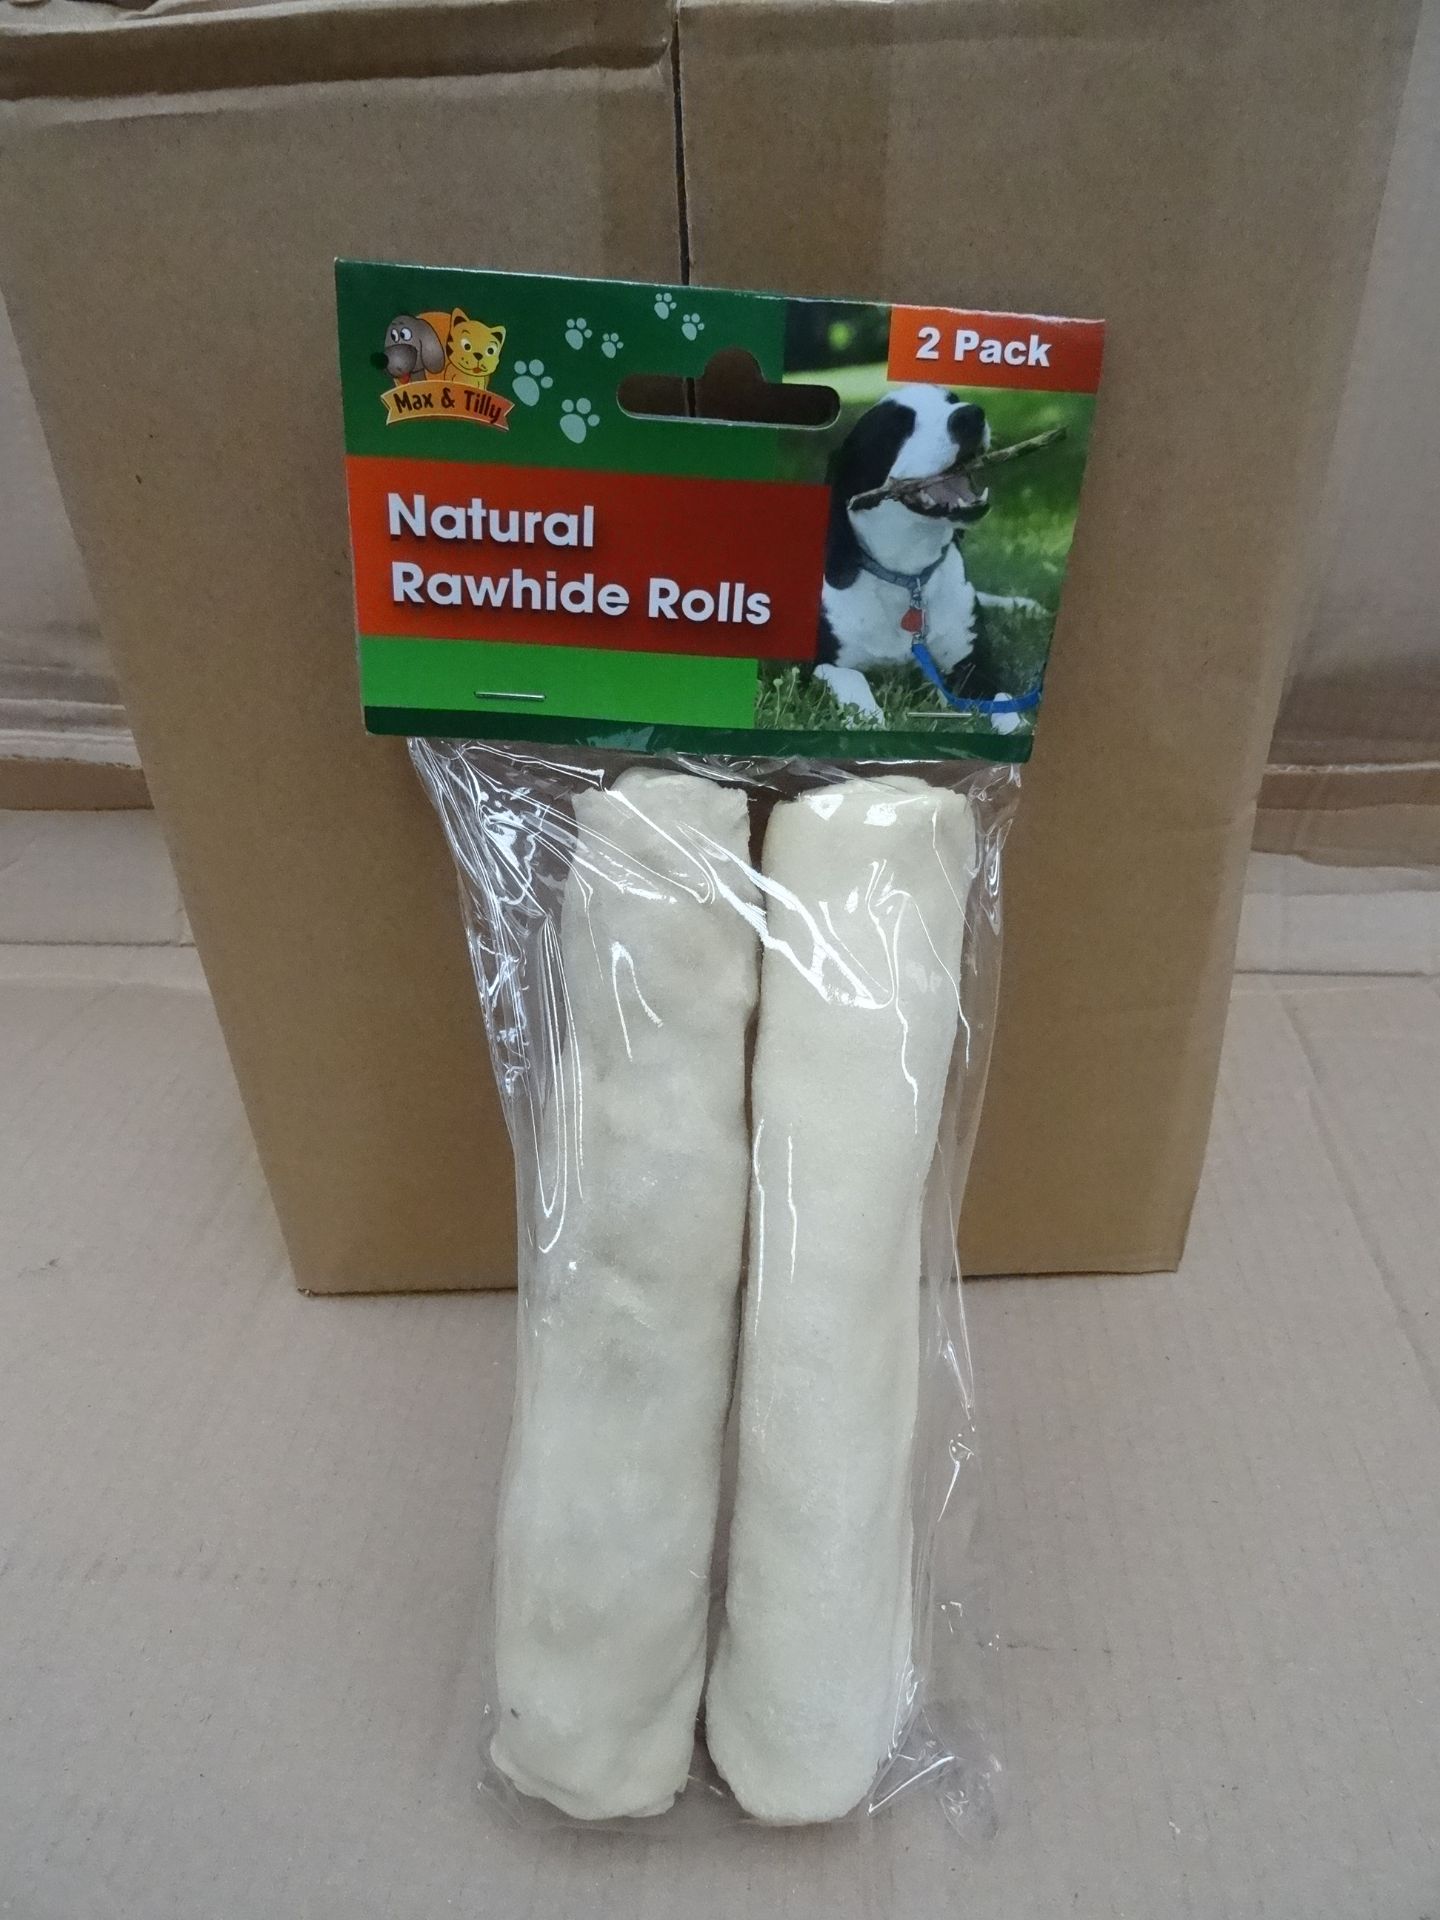 72 x Packs of 2 Max & Tilly Natural Rawhide Rolls. RRP £2.29 Per Pack, Total RRP Value £164.88!